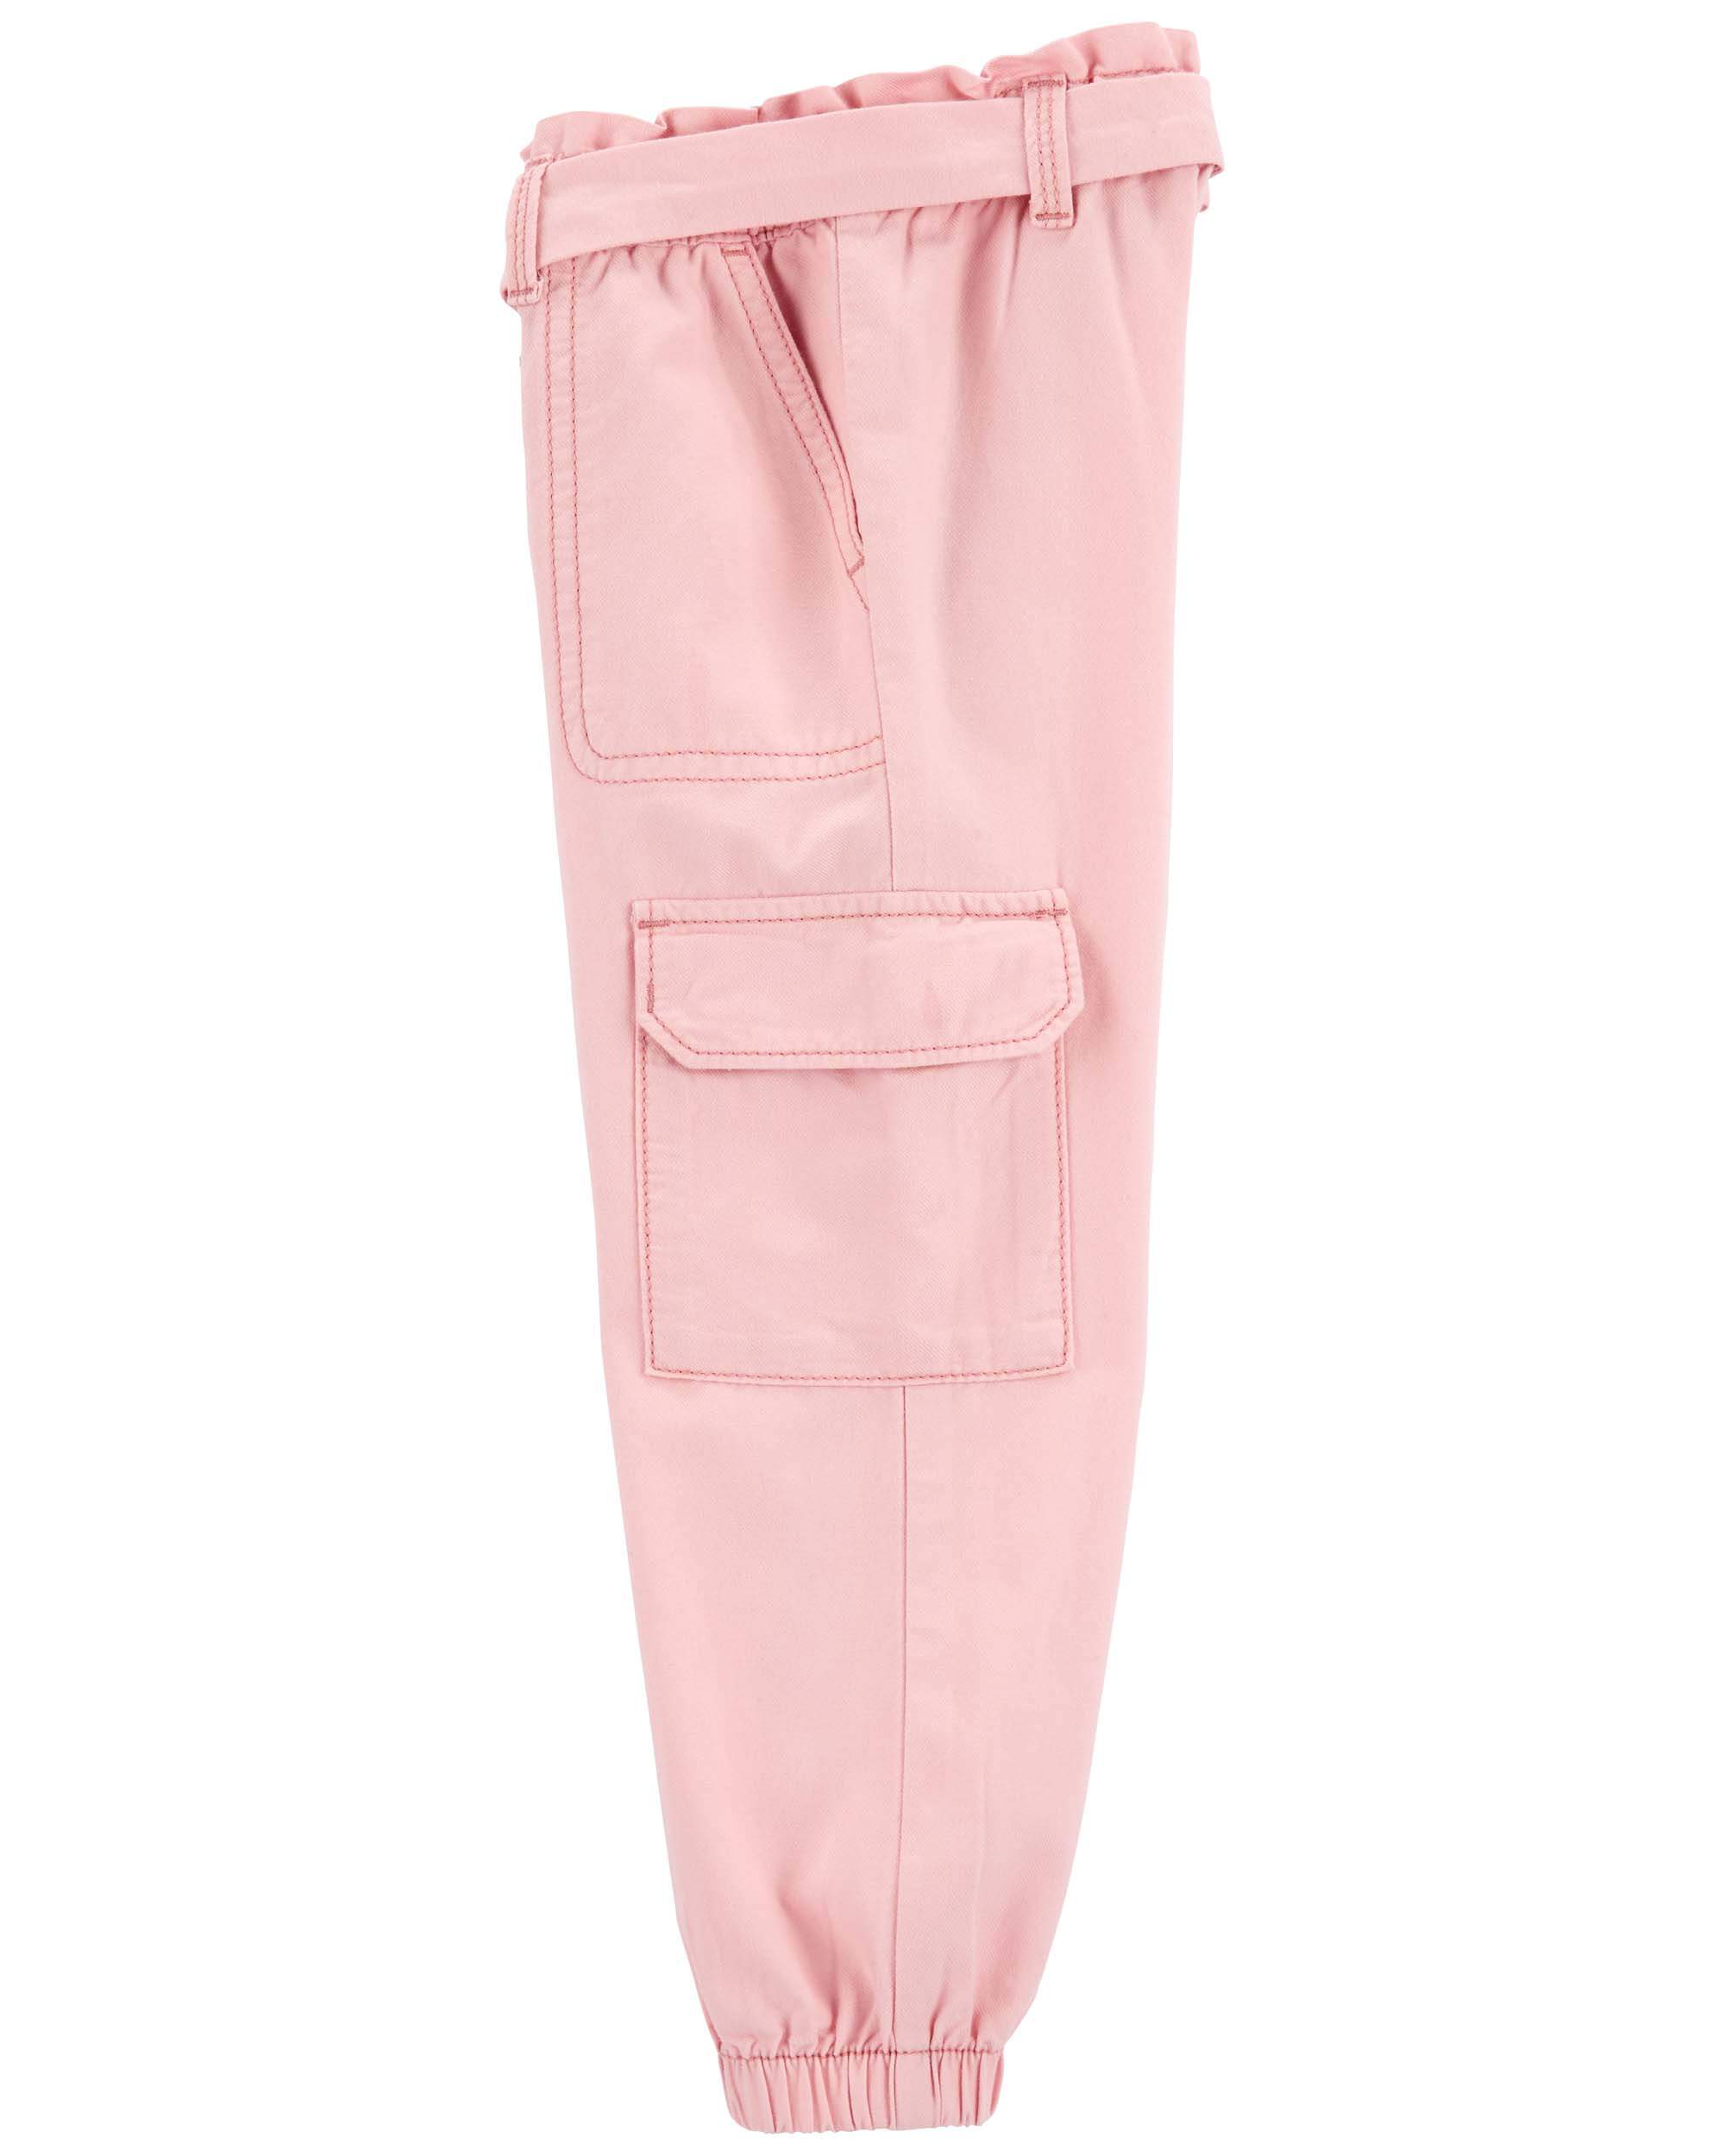 Pink Toddler Soft Cotton 42% Paperbag Cargo Pants Made With 